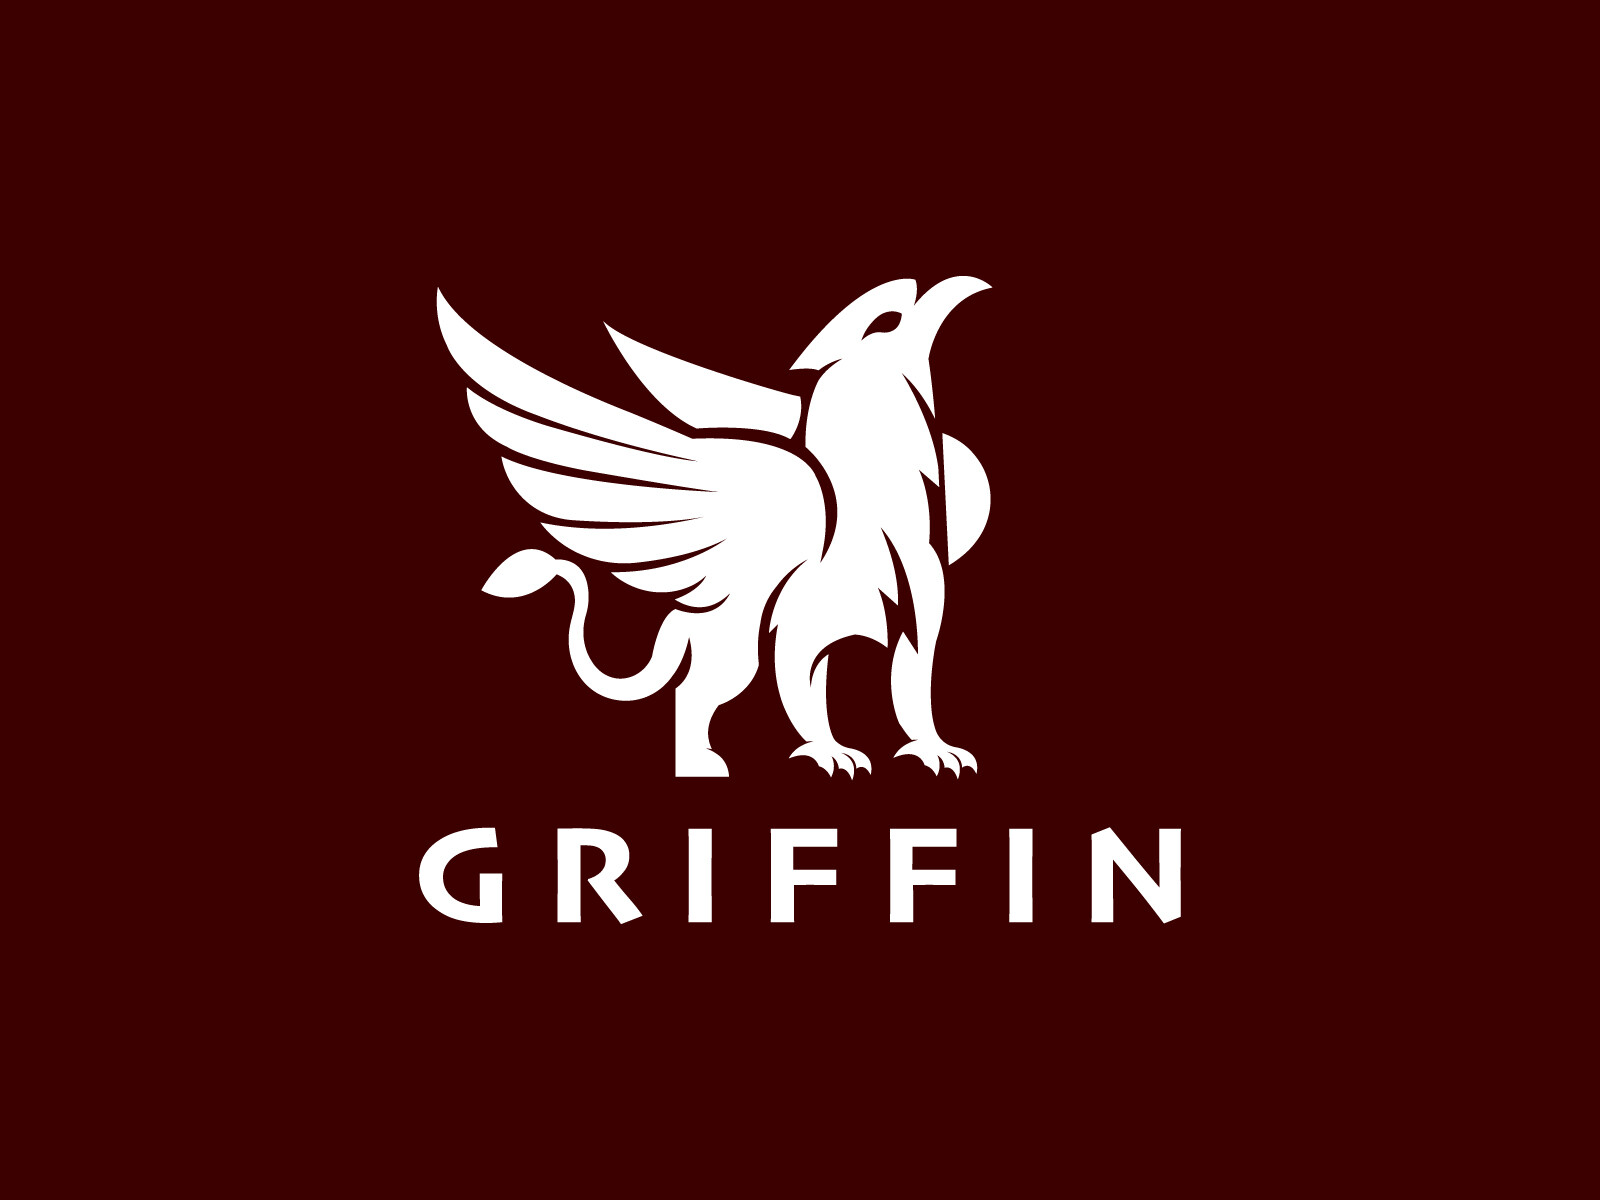 Griffin Logo by Hussnain Graphics on Dribbble